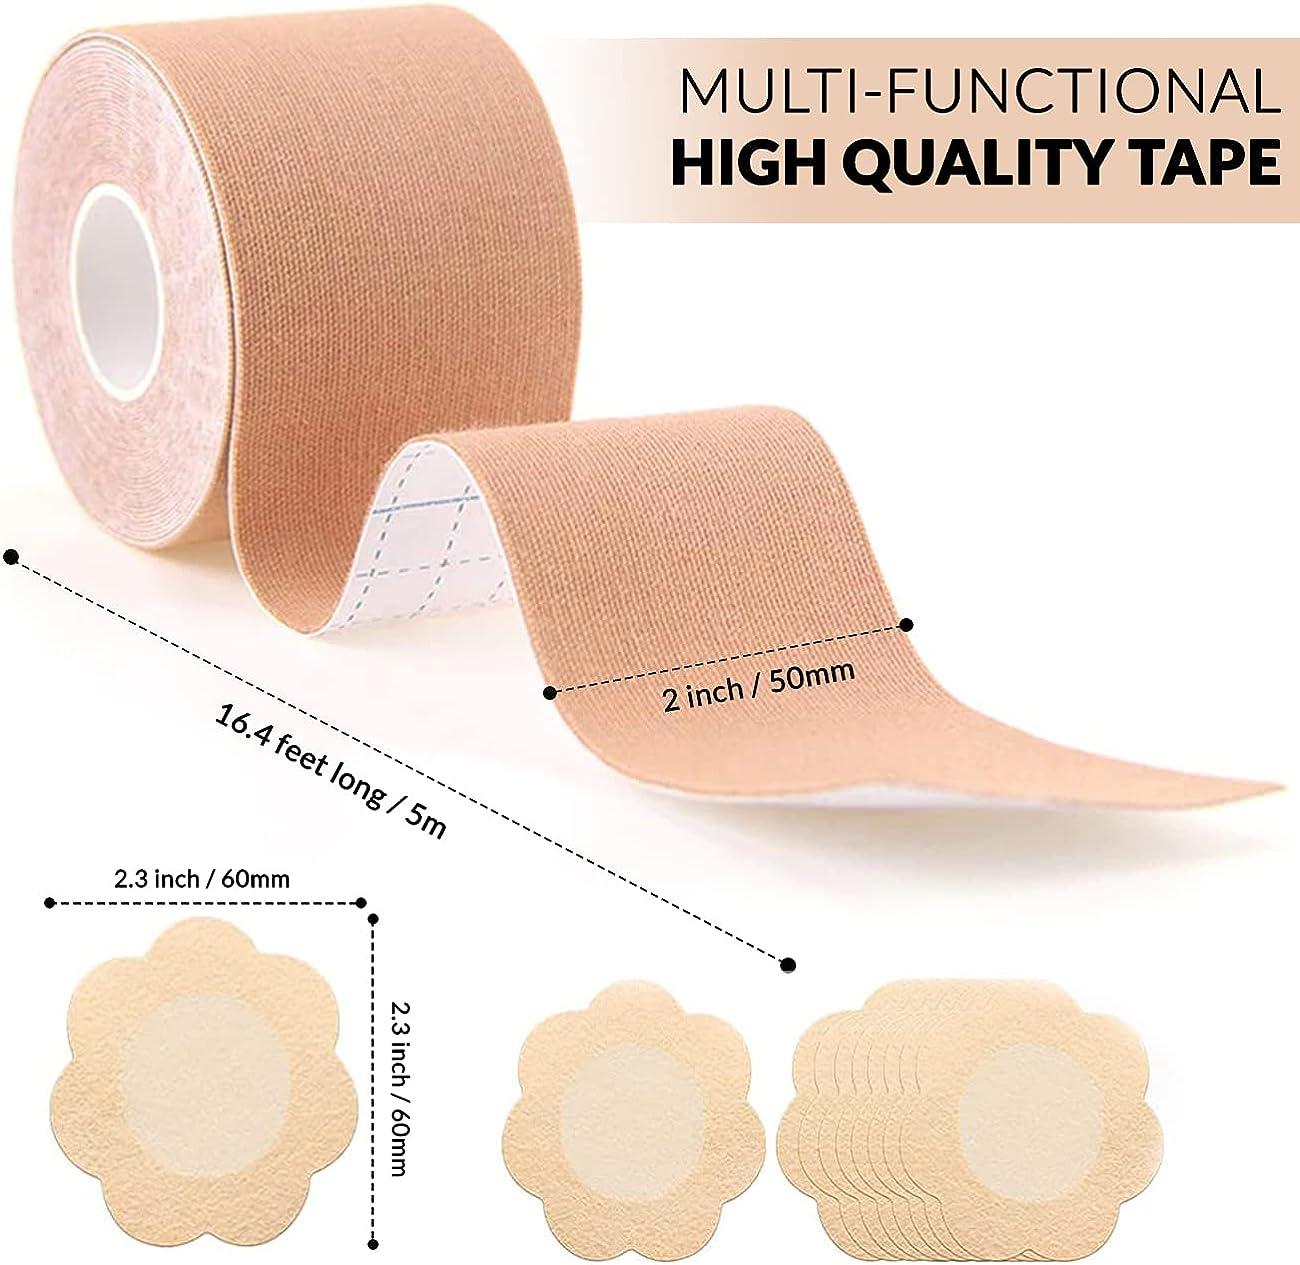 Boob Tape Boobytape Breathable Breast Support Tape Sticky Body Tape for Push  up & Shape in All Clothing Waterproof and Sweatproof Athletic Tape Body  Tape&10 Pcs Disposable Breast Patch